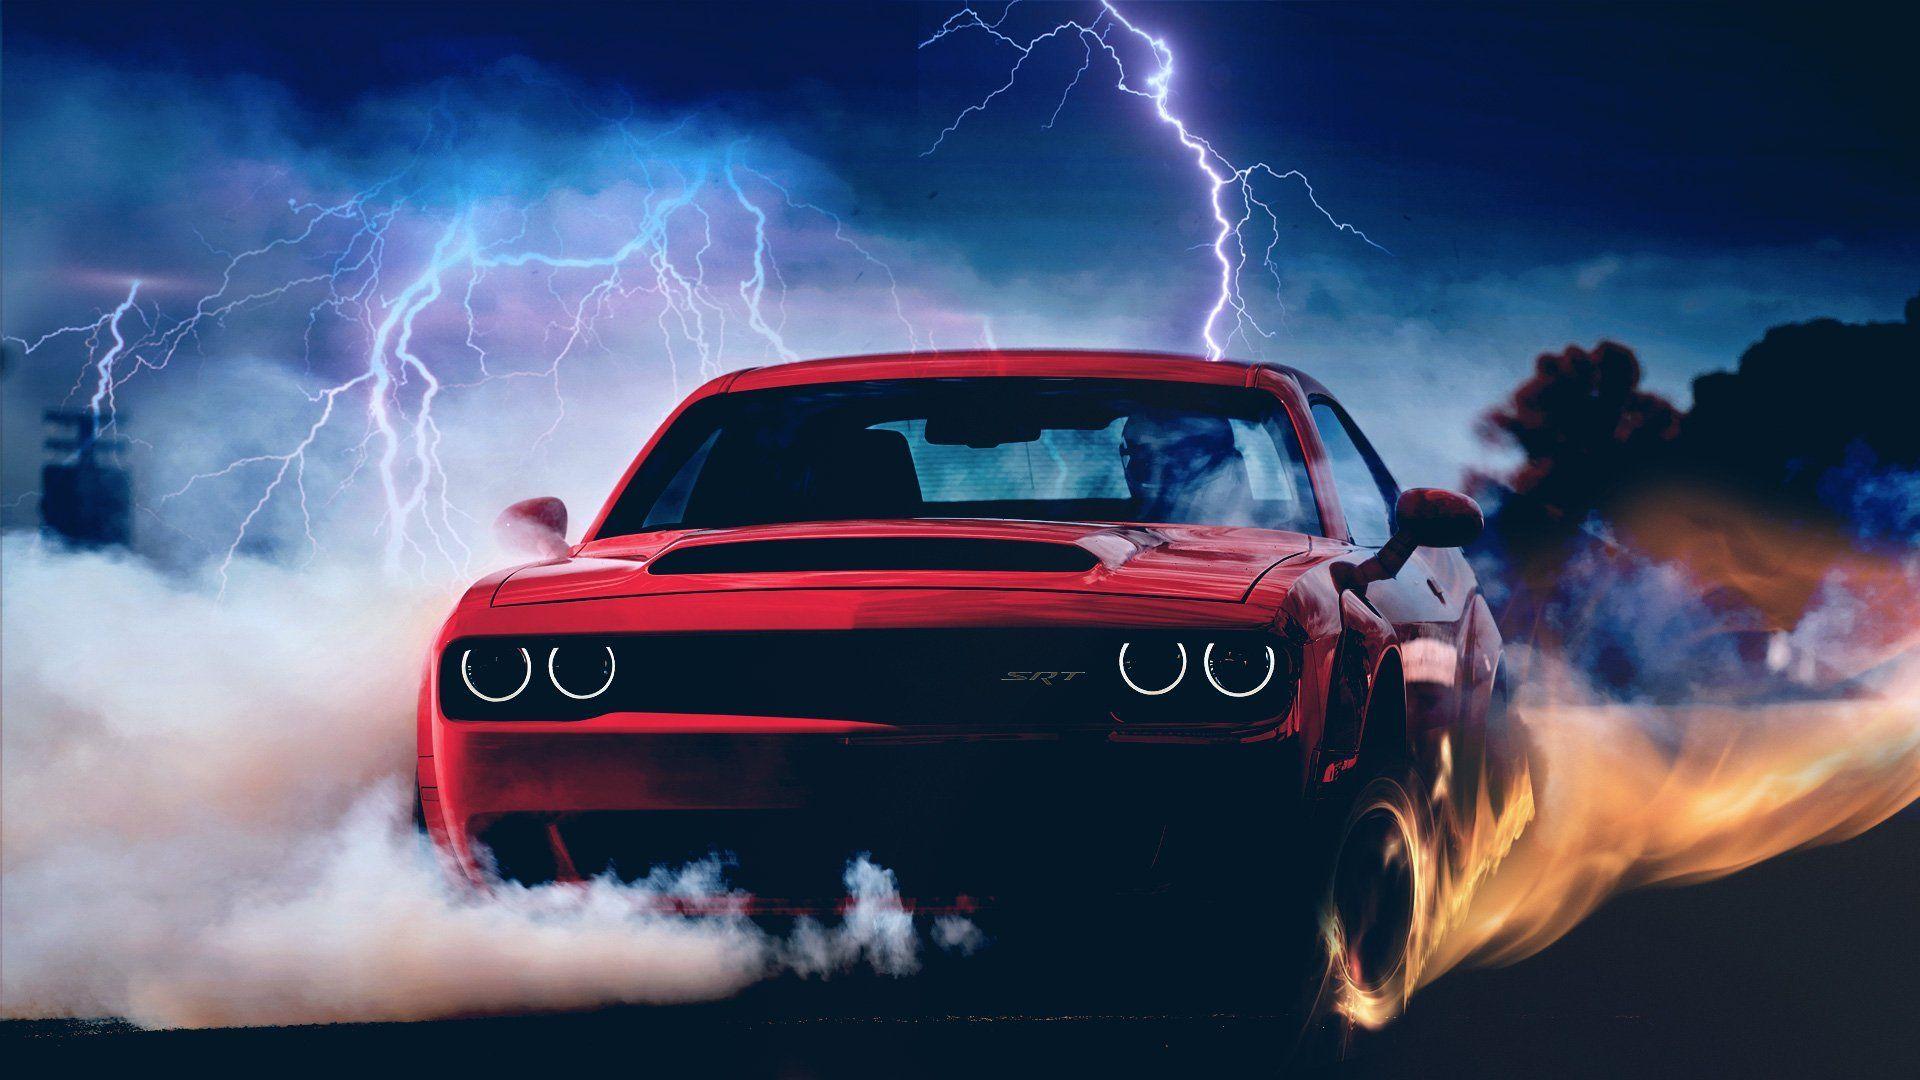 Cool Dodge Wallpapers - Top Free Cool